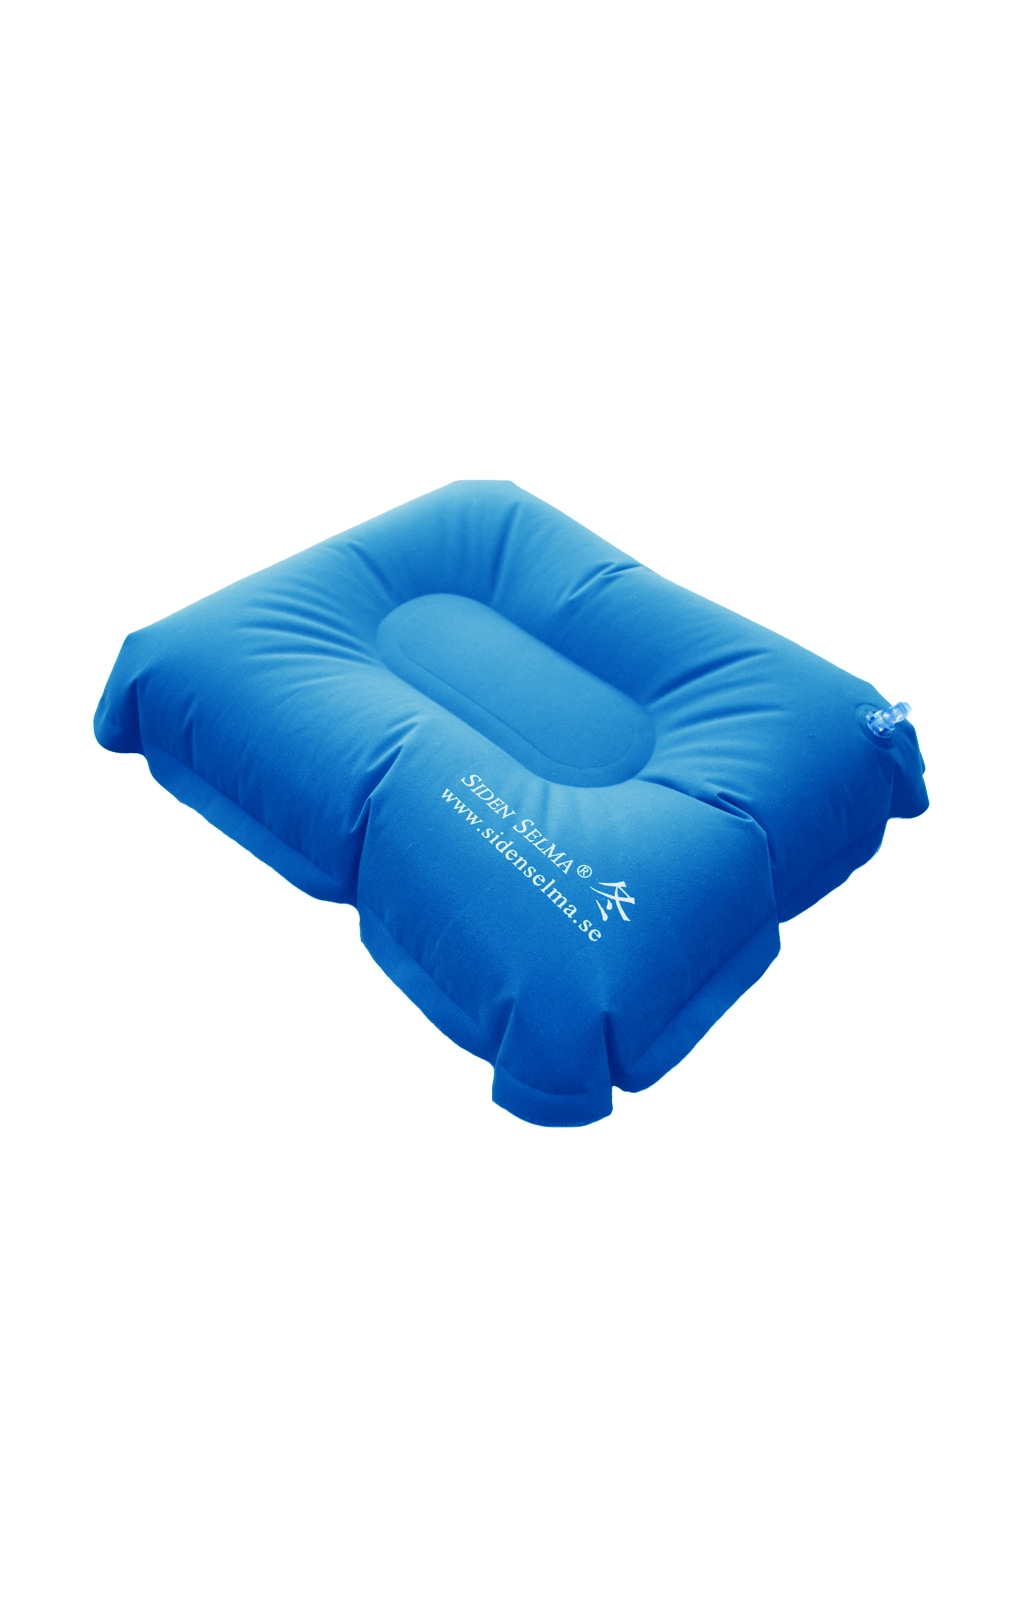 Travel pillow inflatable